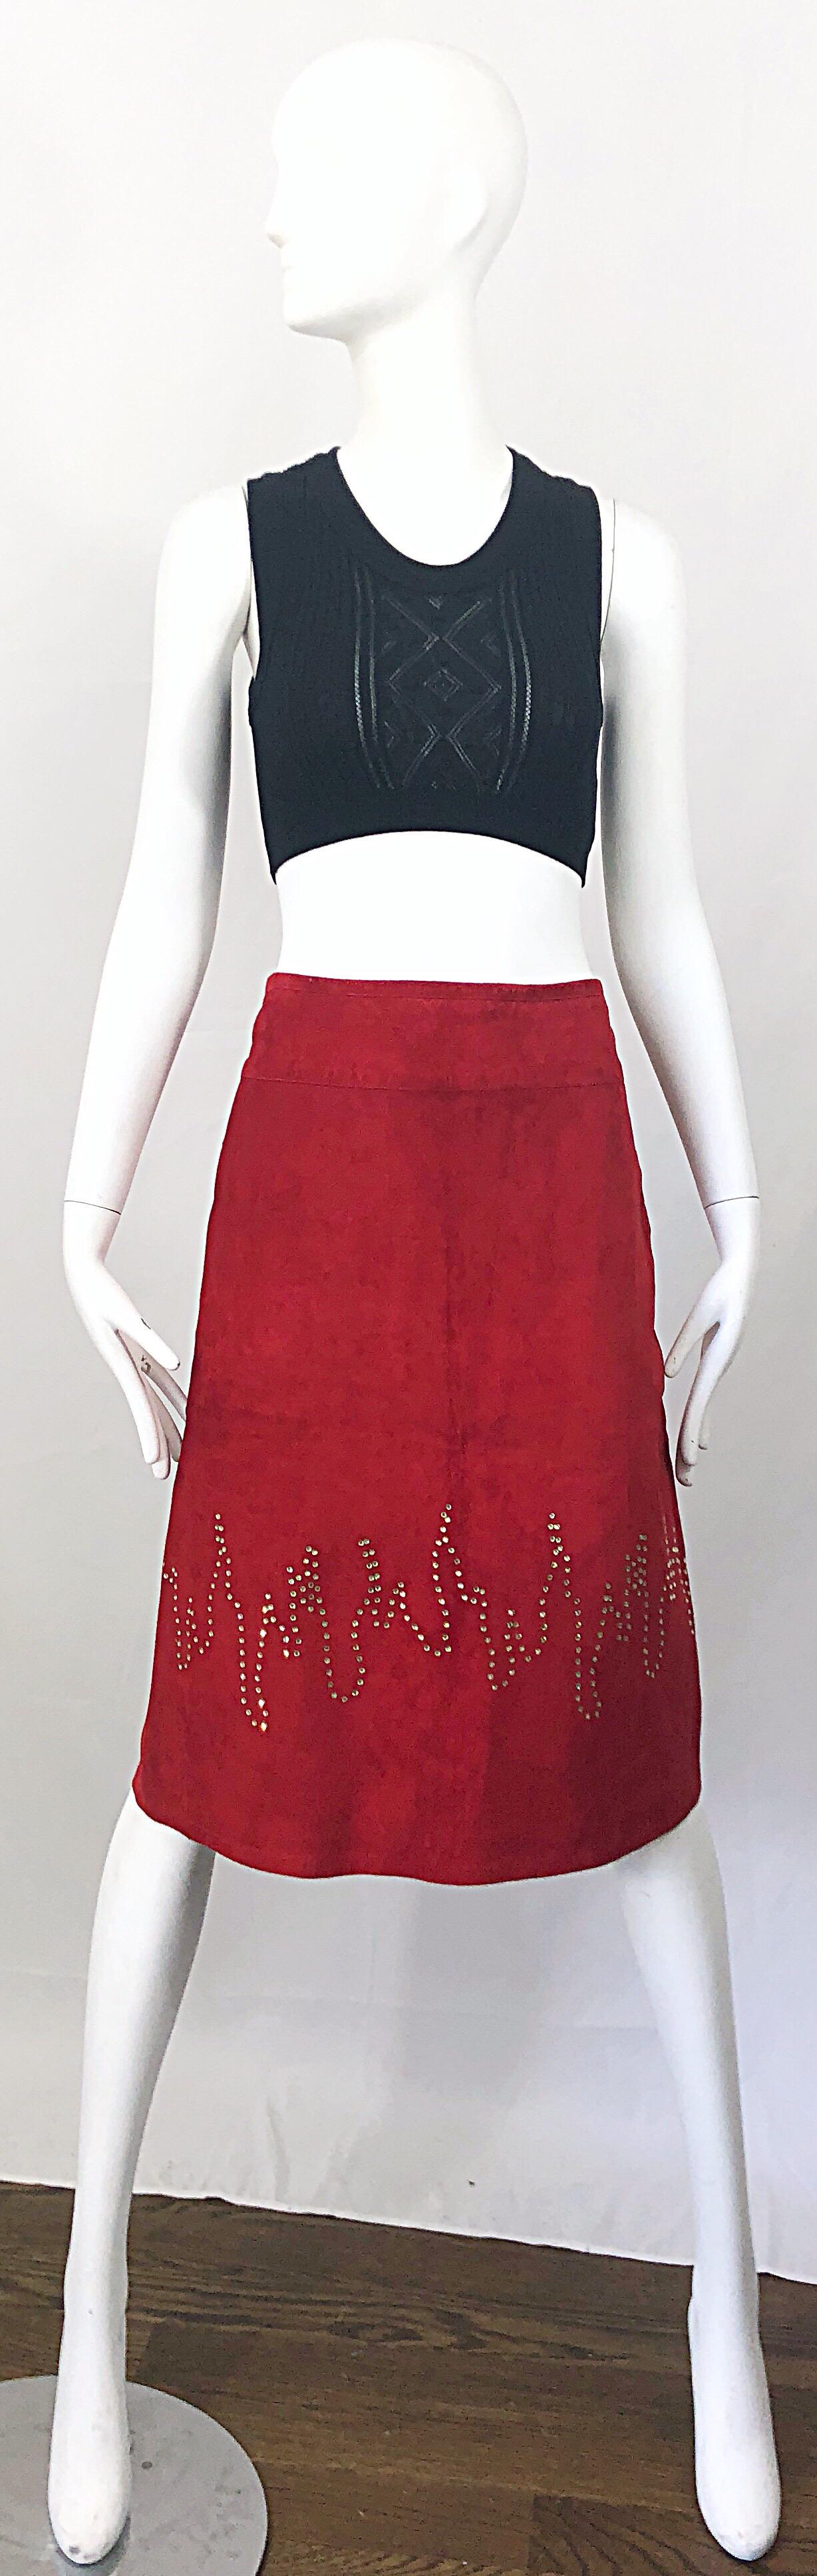 Chic late 1990s fire engine red suede + rhinestones 'flames' skirt! Features hundreds of hand-sewn rhinestones in the shapes of flames. Fully lined in silk printed with navy blue and purple polka dots. Hidden zipper up the side with button closure.